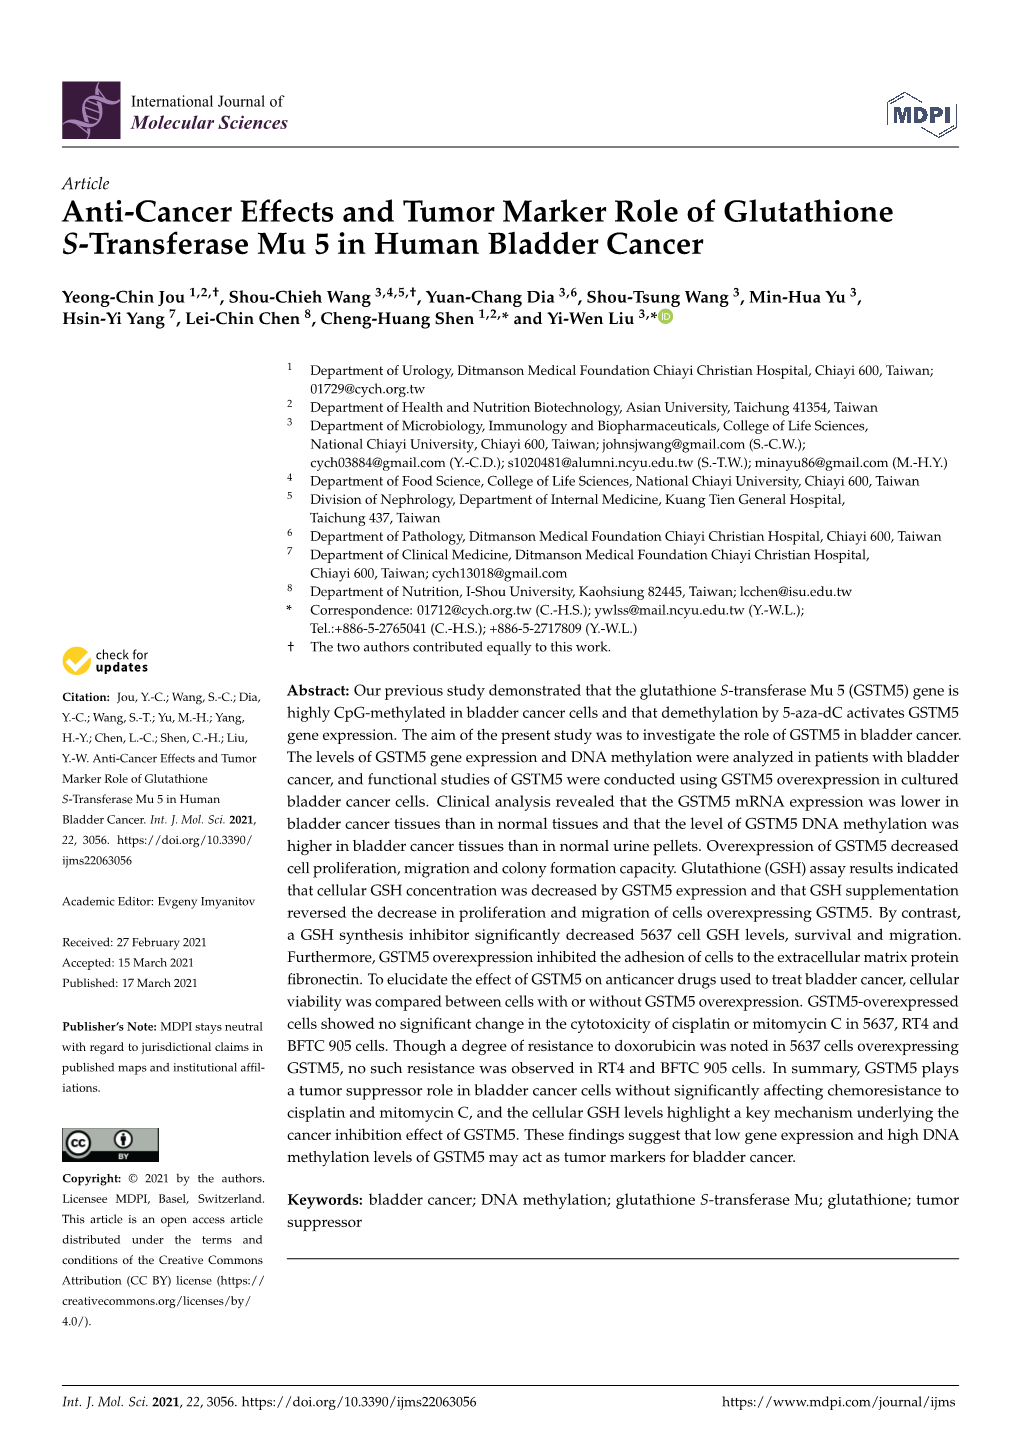 Anti-Cancer Effects and Tumor Marker Role of Glutathione S-Transferase Mu 5 in Human Bladder Cancer